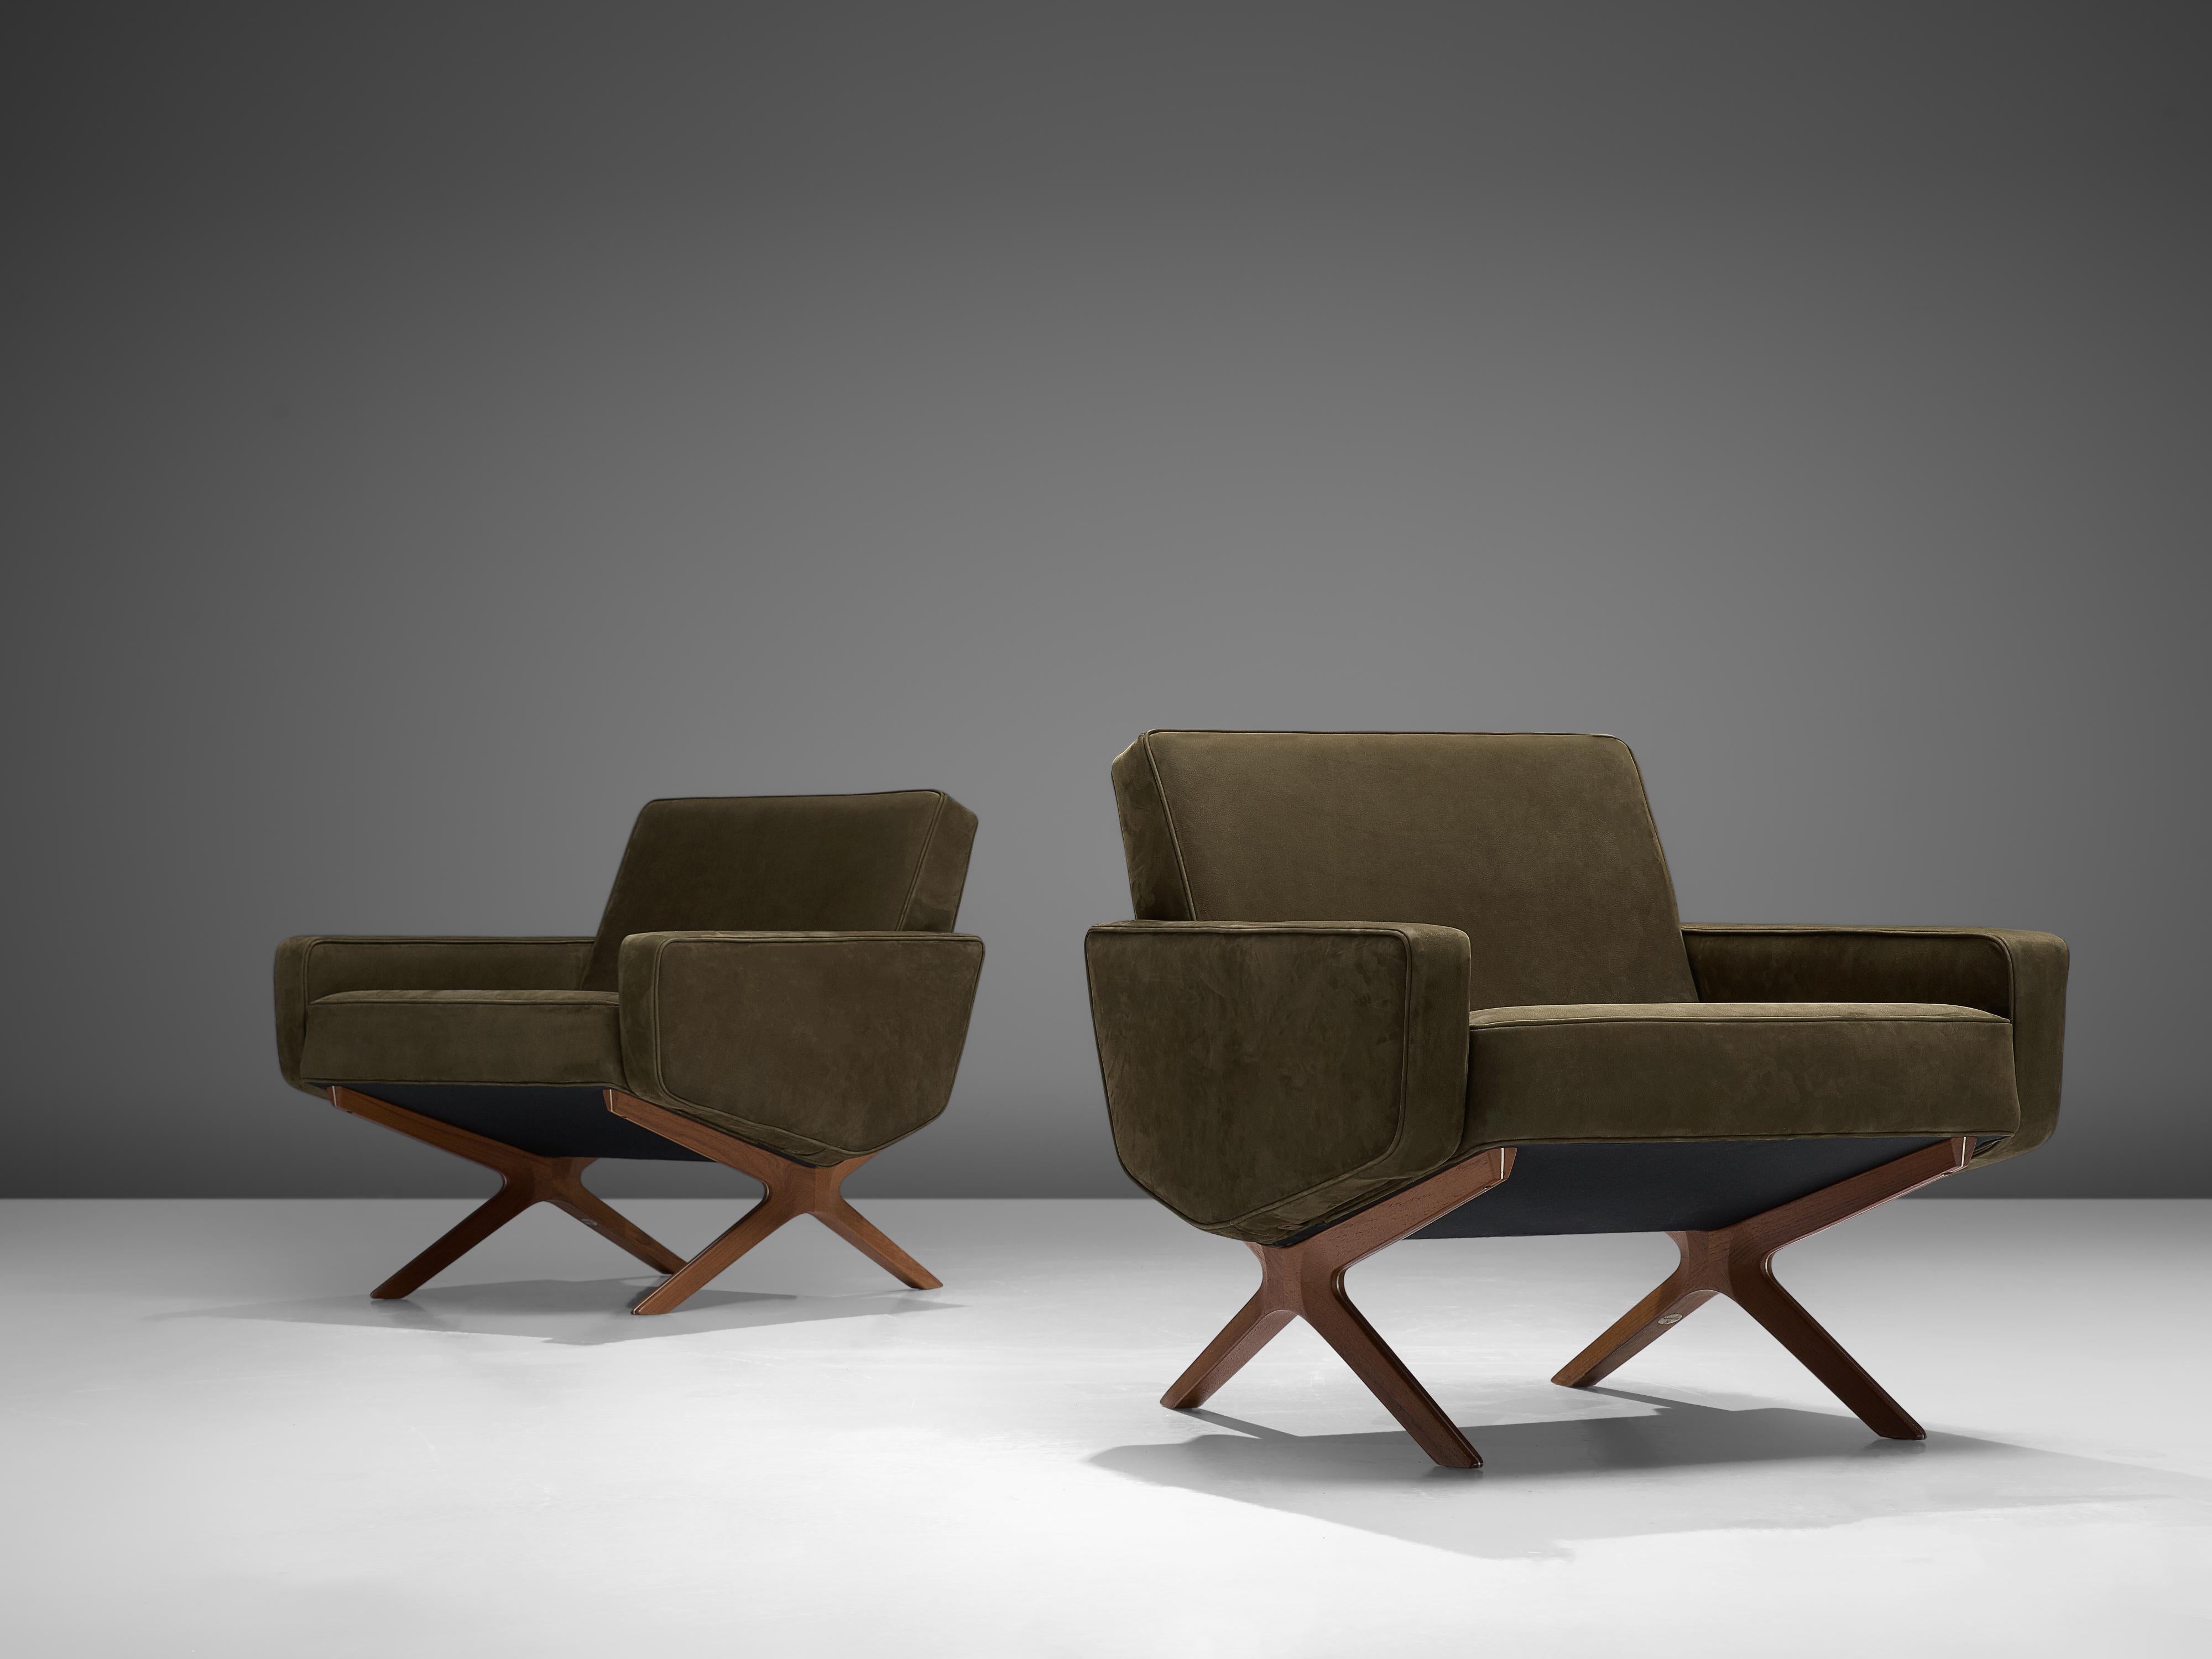 Peter Hvidt & Orla Mølgaard Nielsen for France & Søn, lounge chairs, model ´Silverline´, teak, leather and metal, Denmark, 1960s. 

Comfortable lounge chairs with an architectural design by Danish designers Hvidt & Mølgaard Nielsen. This model is